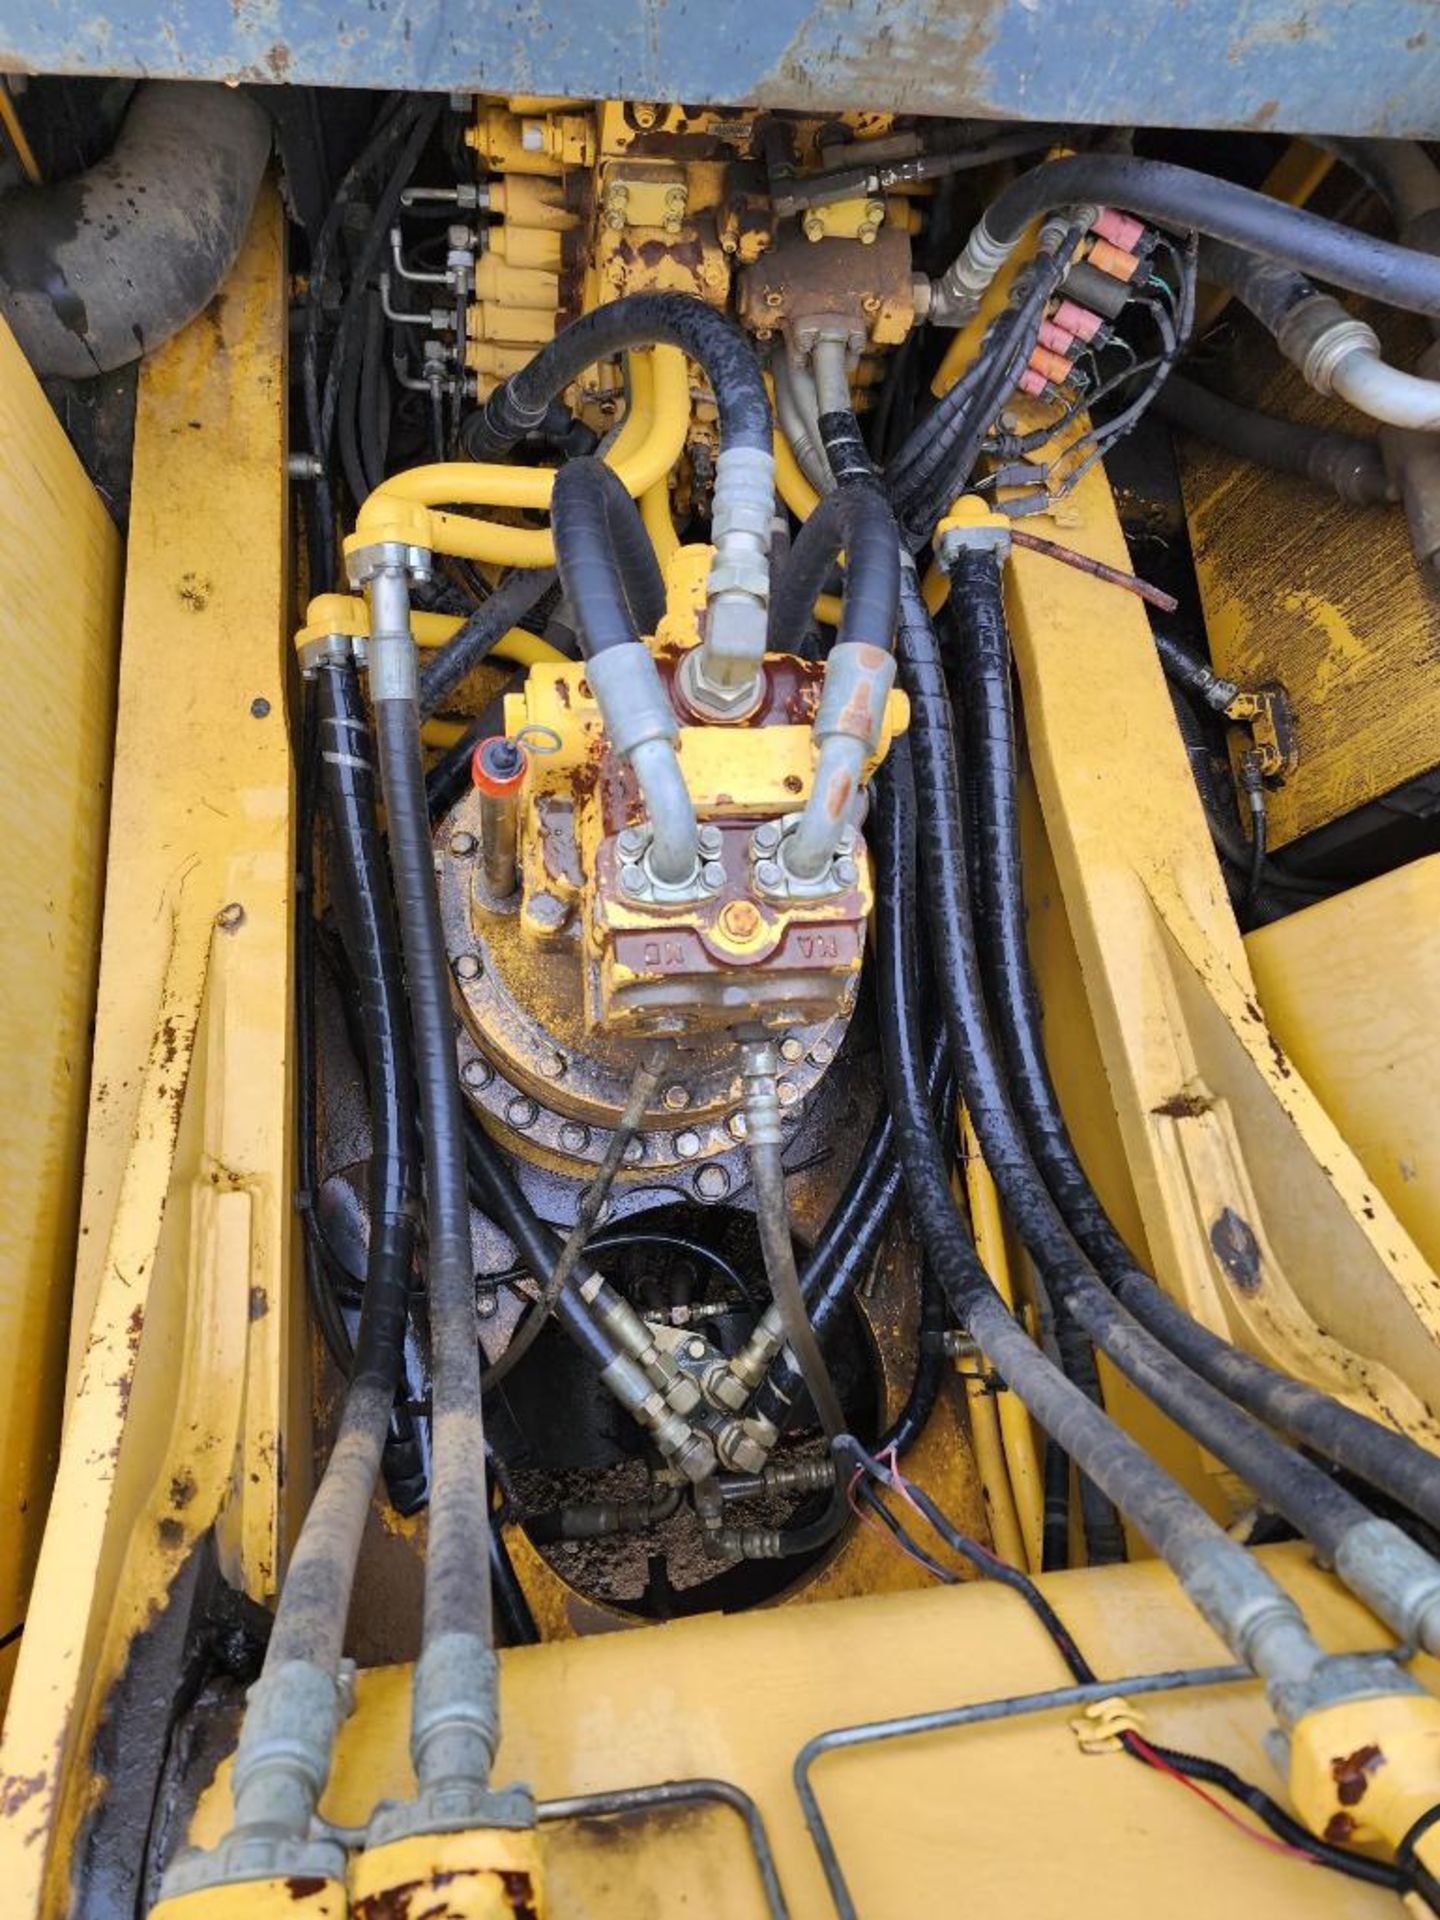 2005 Komatsu PC-400 LC Hydraulic Excavator, Approx. 6,800 Hours, S/N A86322 (Located at 3003 West 52 - Image 10 of 14